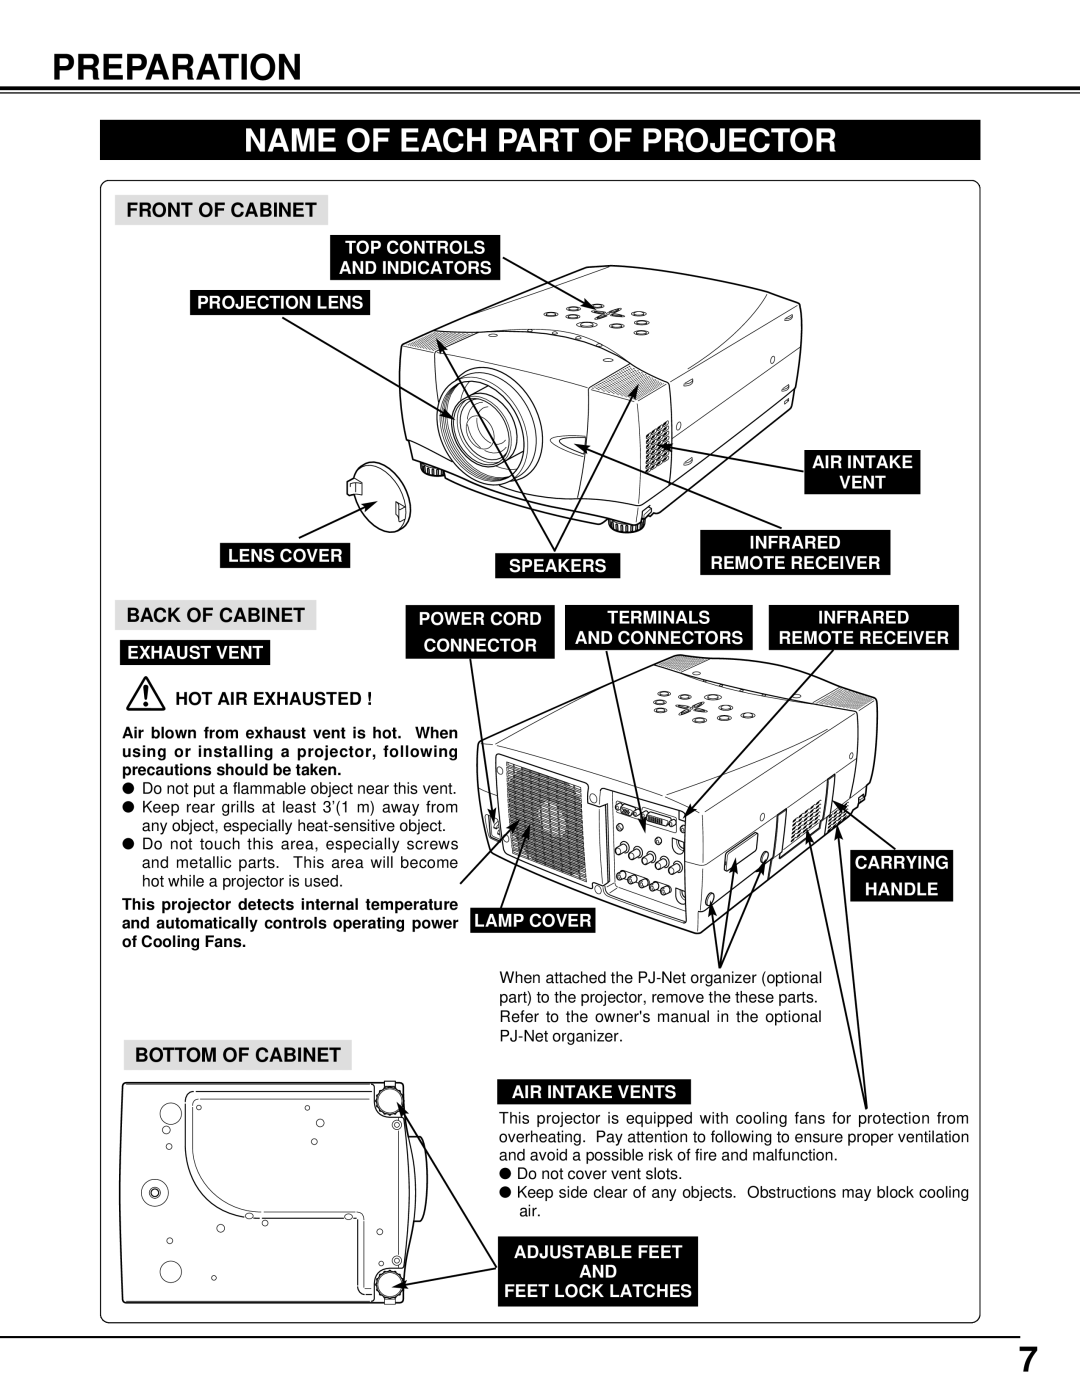 Sanyo PLV-70 owner manual Preparation, Name Of Each Part Of Projector, Front Of Cabinet, Back Of Cabinet, Bottom Of Cabinet 